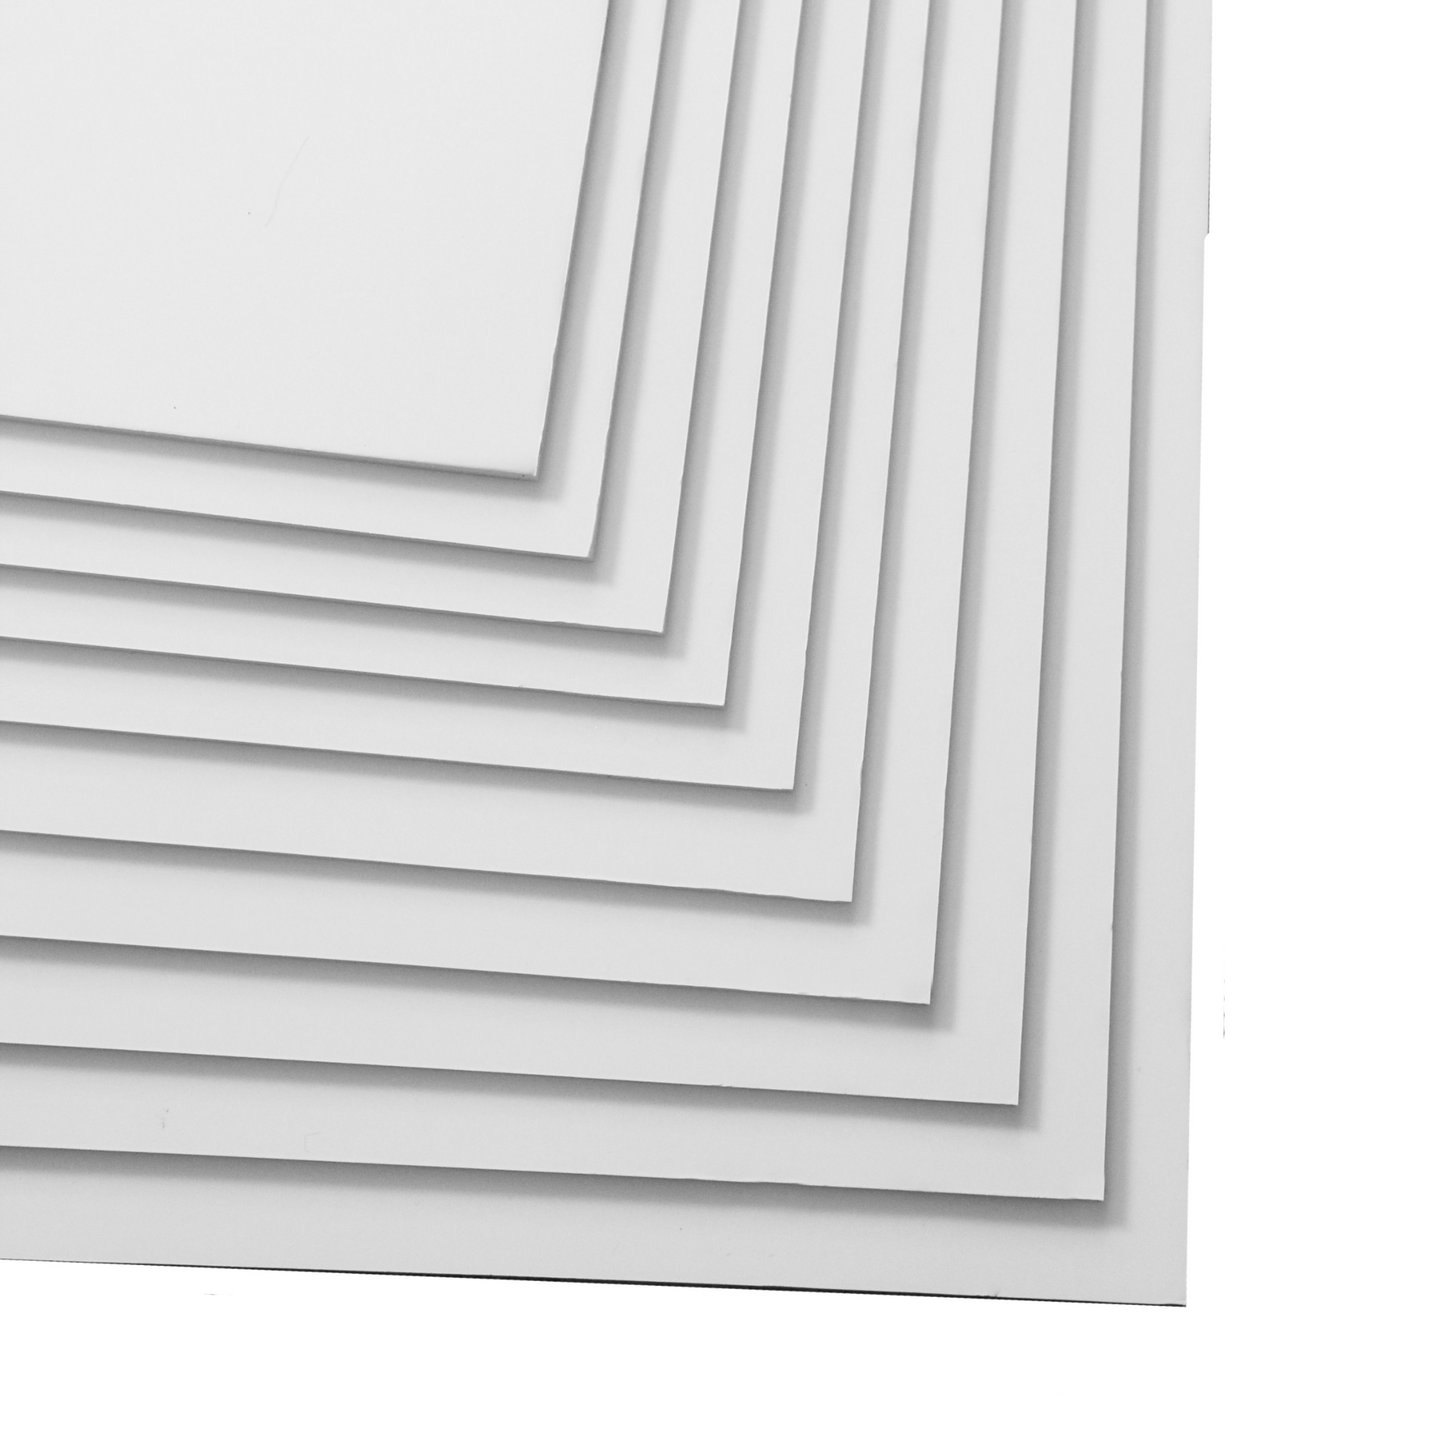 A2 White 5mm Foamboard - Pack of 20